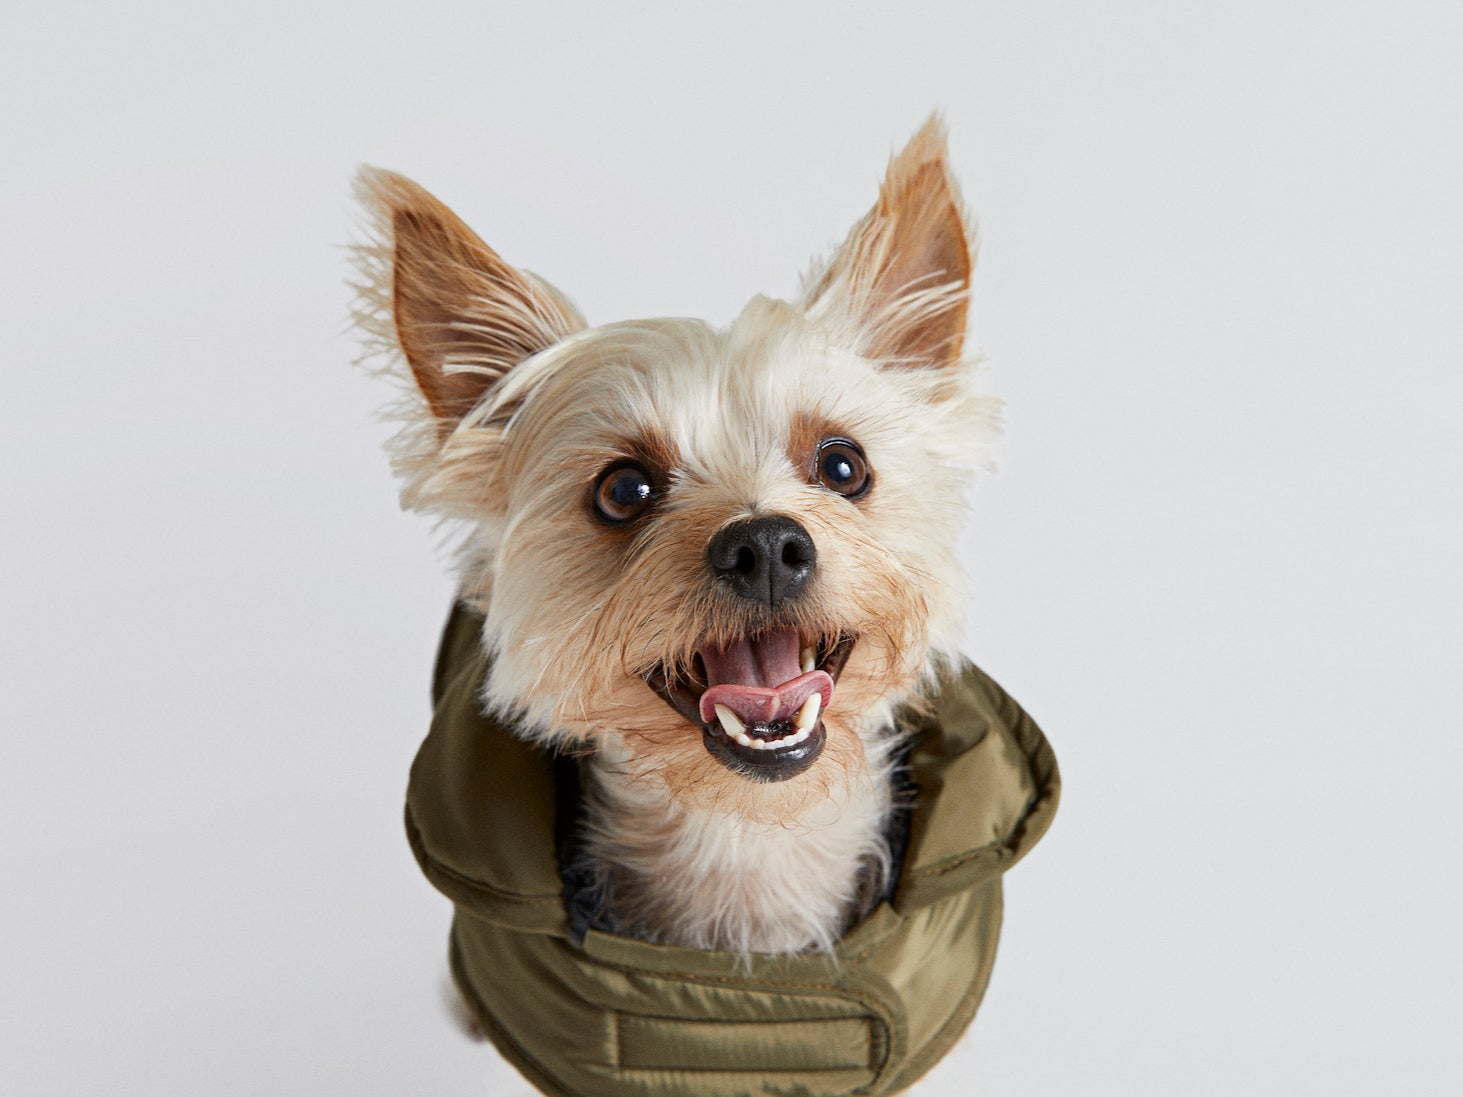 River Island’s new RI Dog collection includes coats, jumpers, leashes and other dog accessories